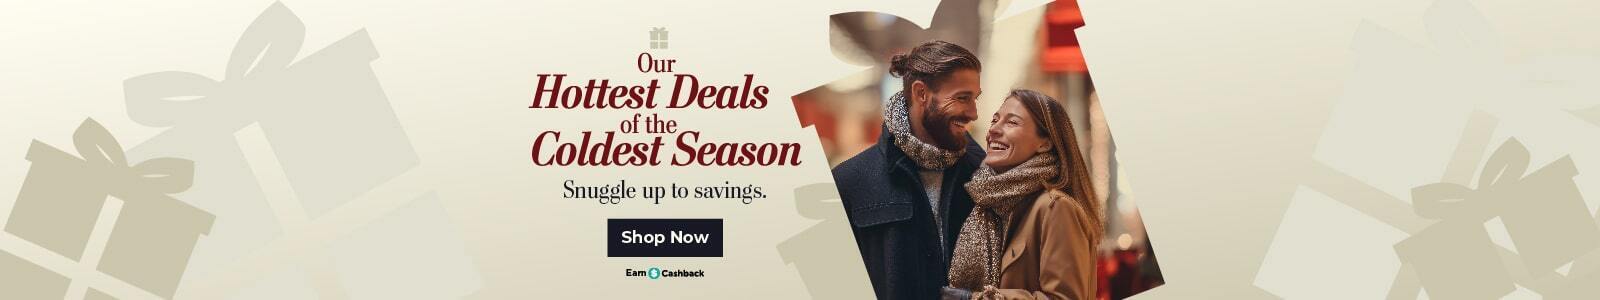 Our Hottest Deals of the Coldest Season Snuggle up to savings. Shop Now. Earn Cashback.